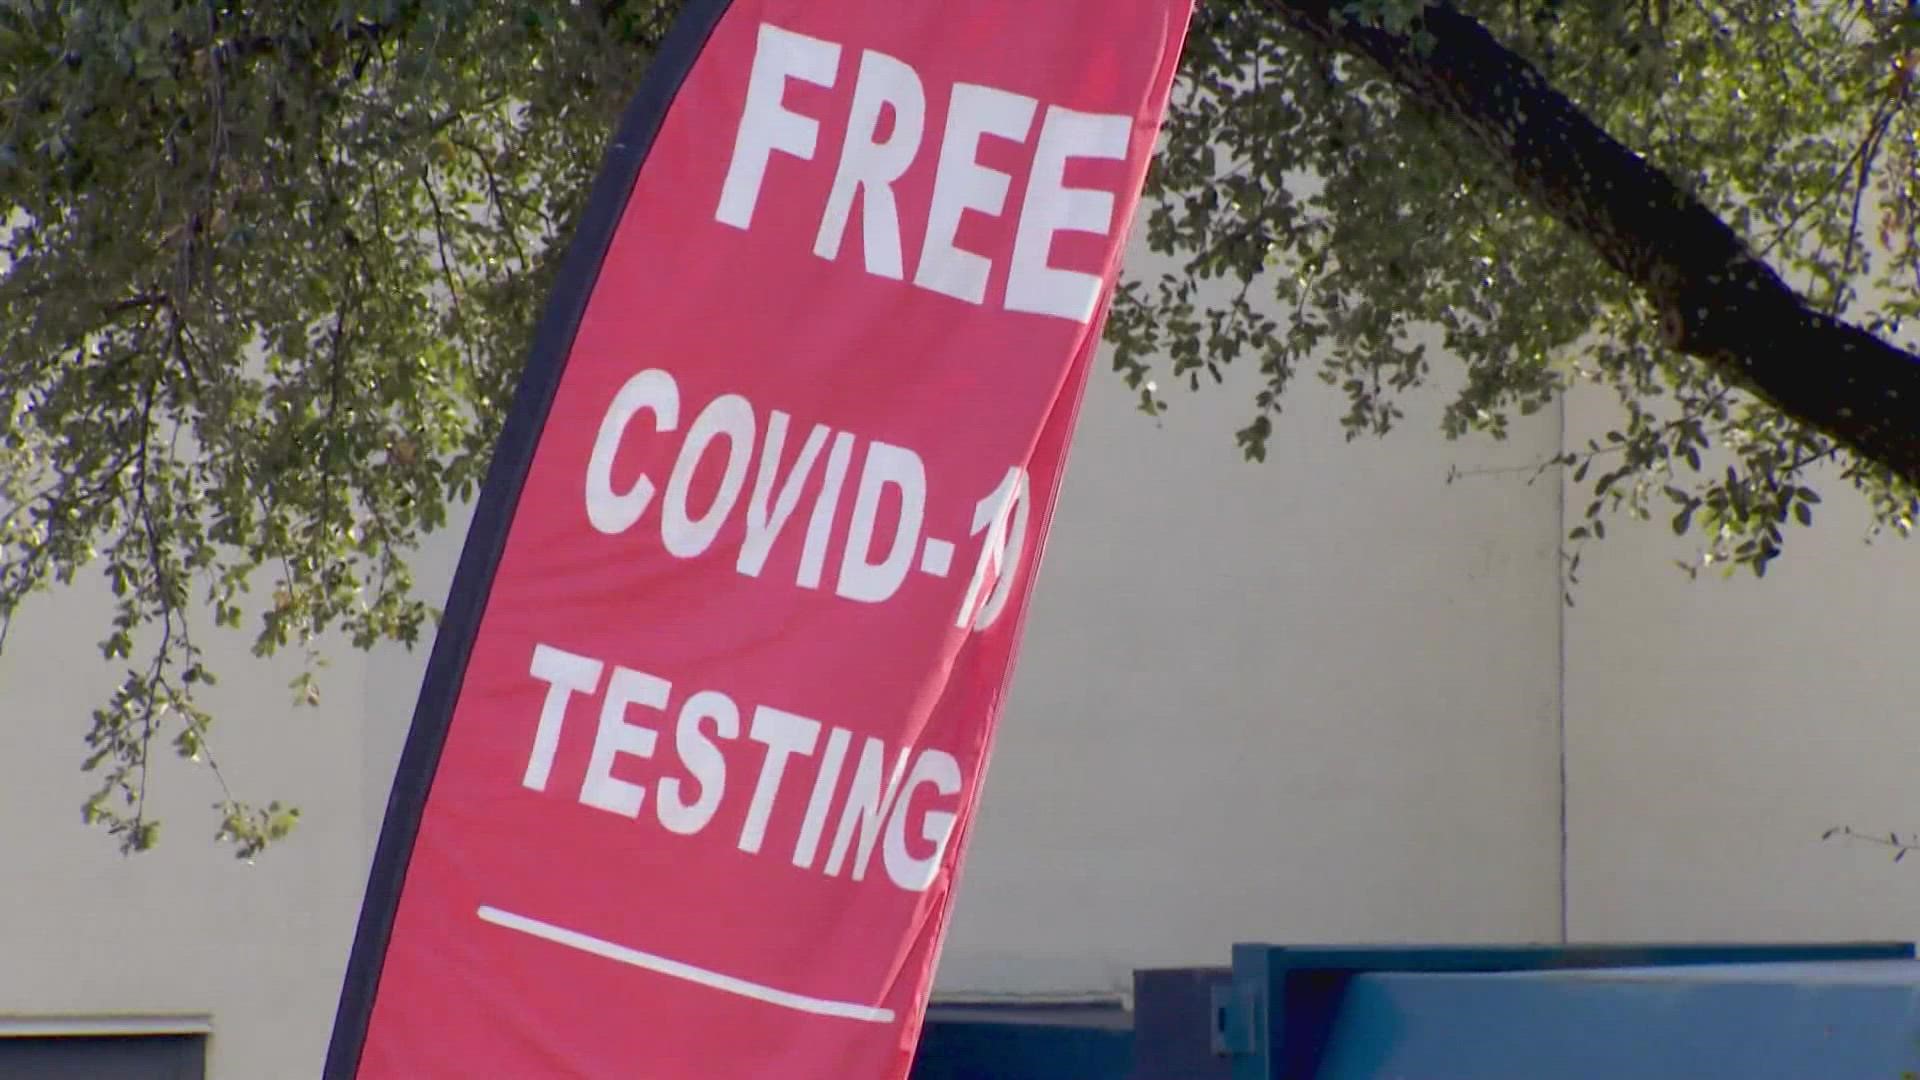 Finding a COVID-19 testing site is one thing. Making sure it's legit is a different story.